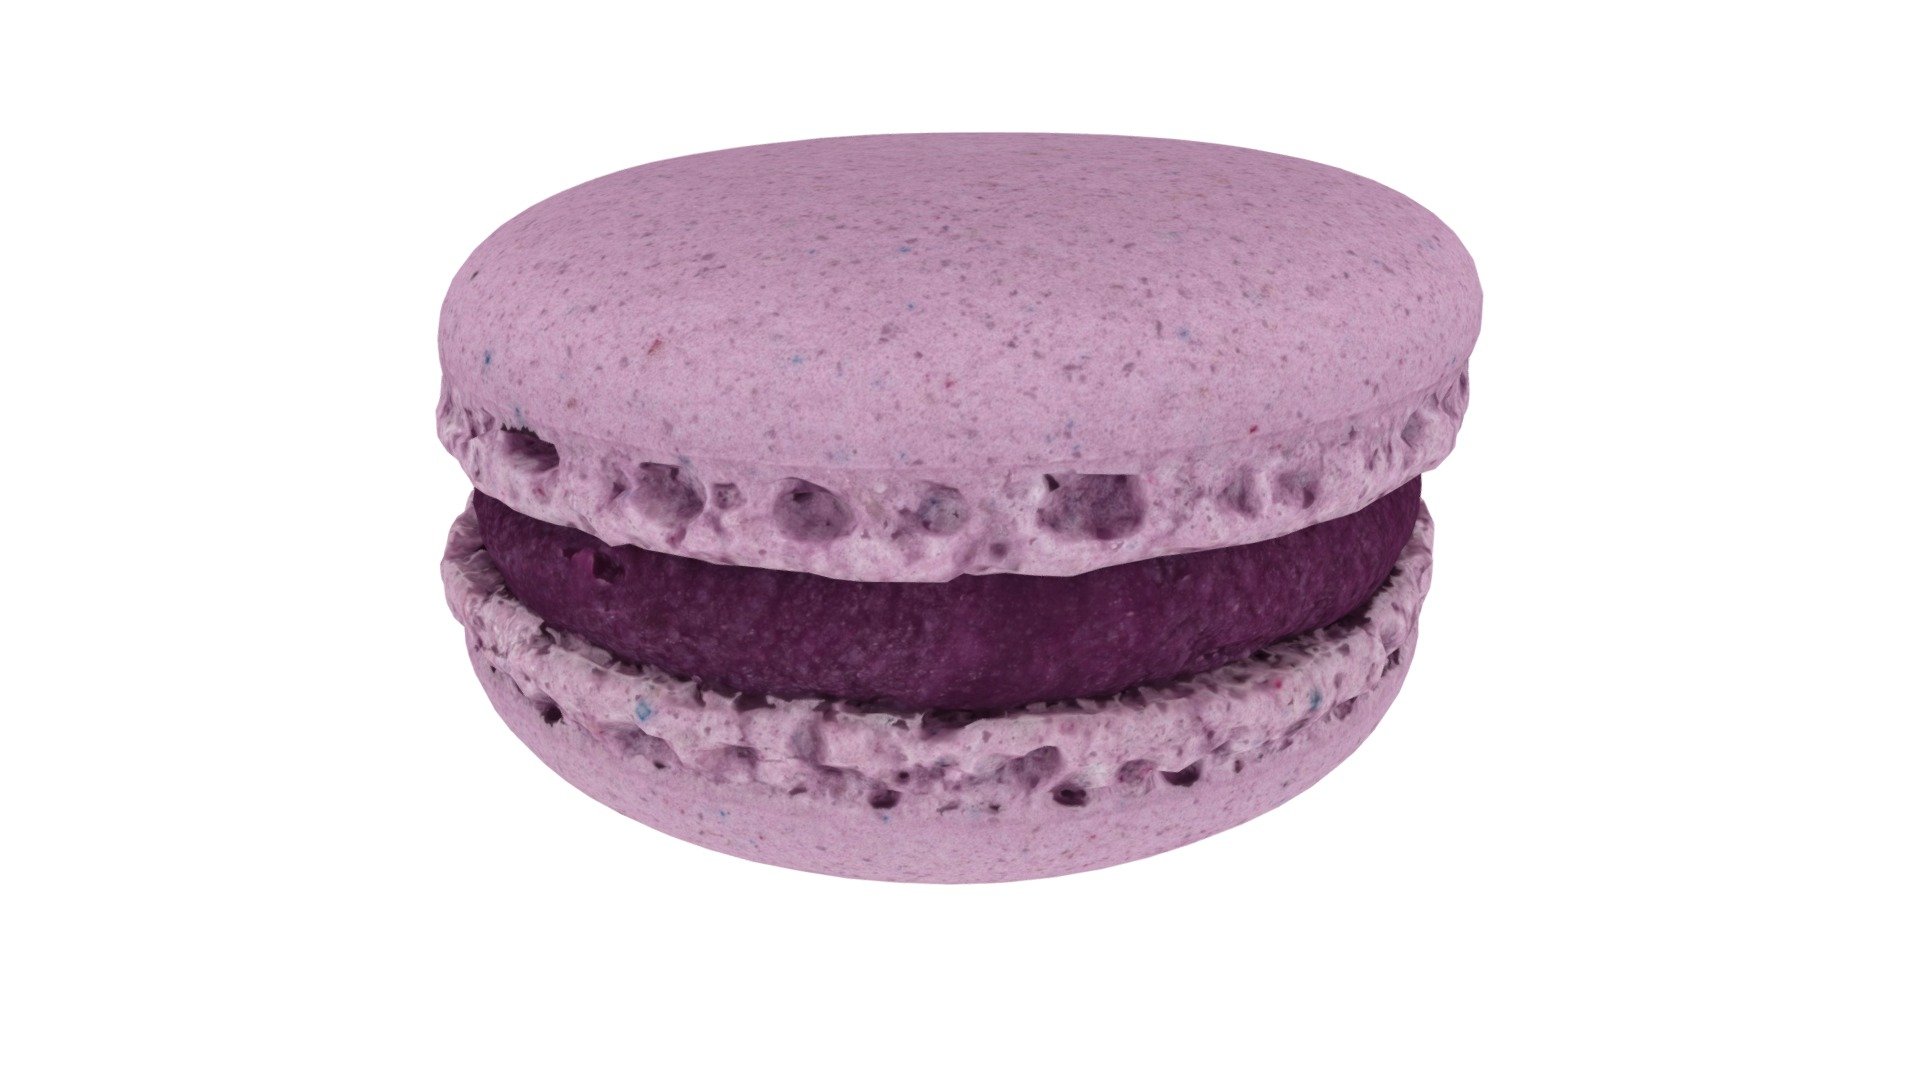 Highly detailed, photorealistic, 3d scanned model of a blueberry macaron. 8k textures maps, optimized topology and uv unwrapped.

Model shown here is lowpoly with diffuse map only and 4k texture size.

This model is available at www.thecreativecrops.com 3d model